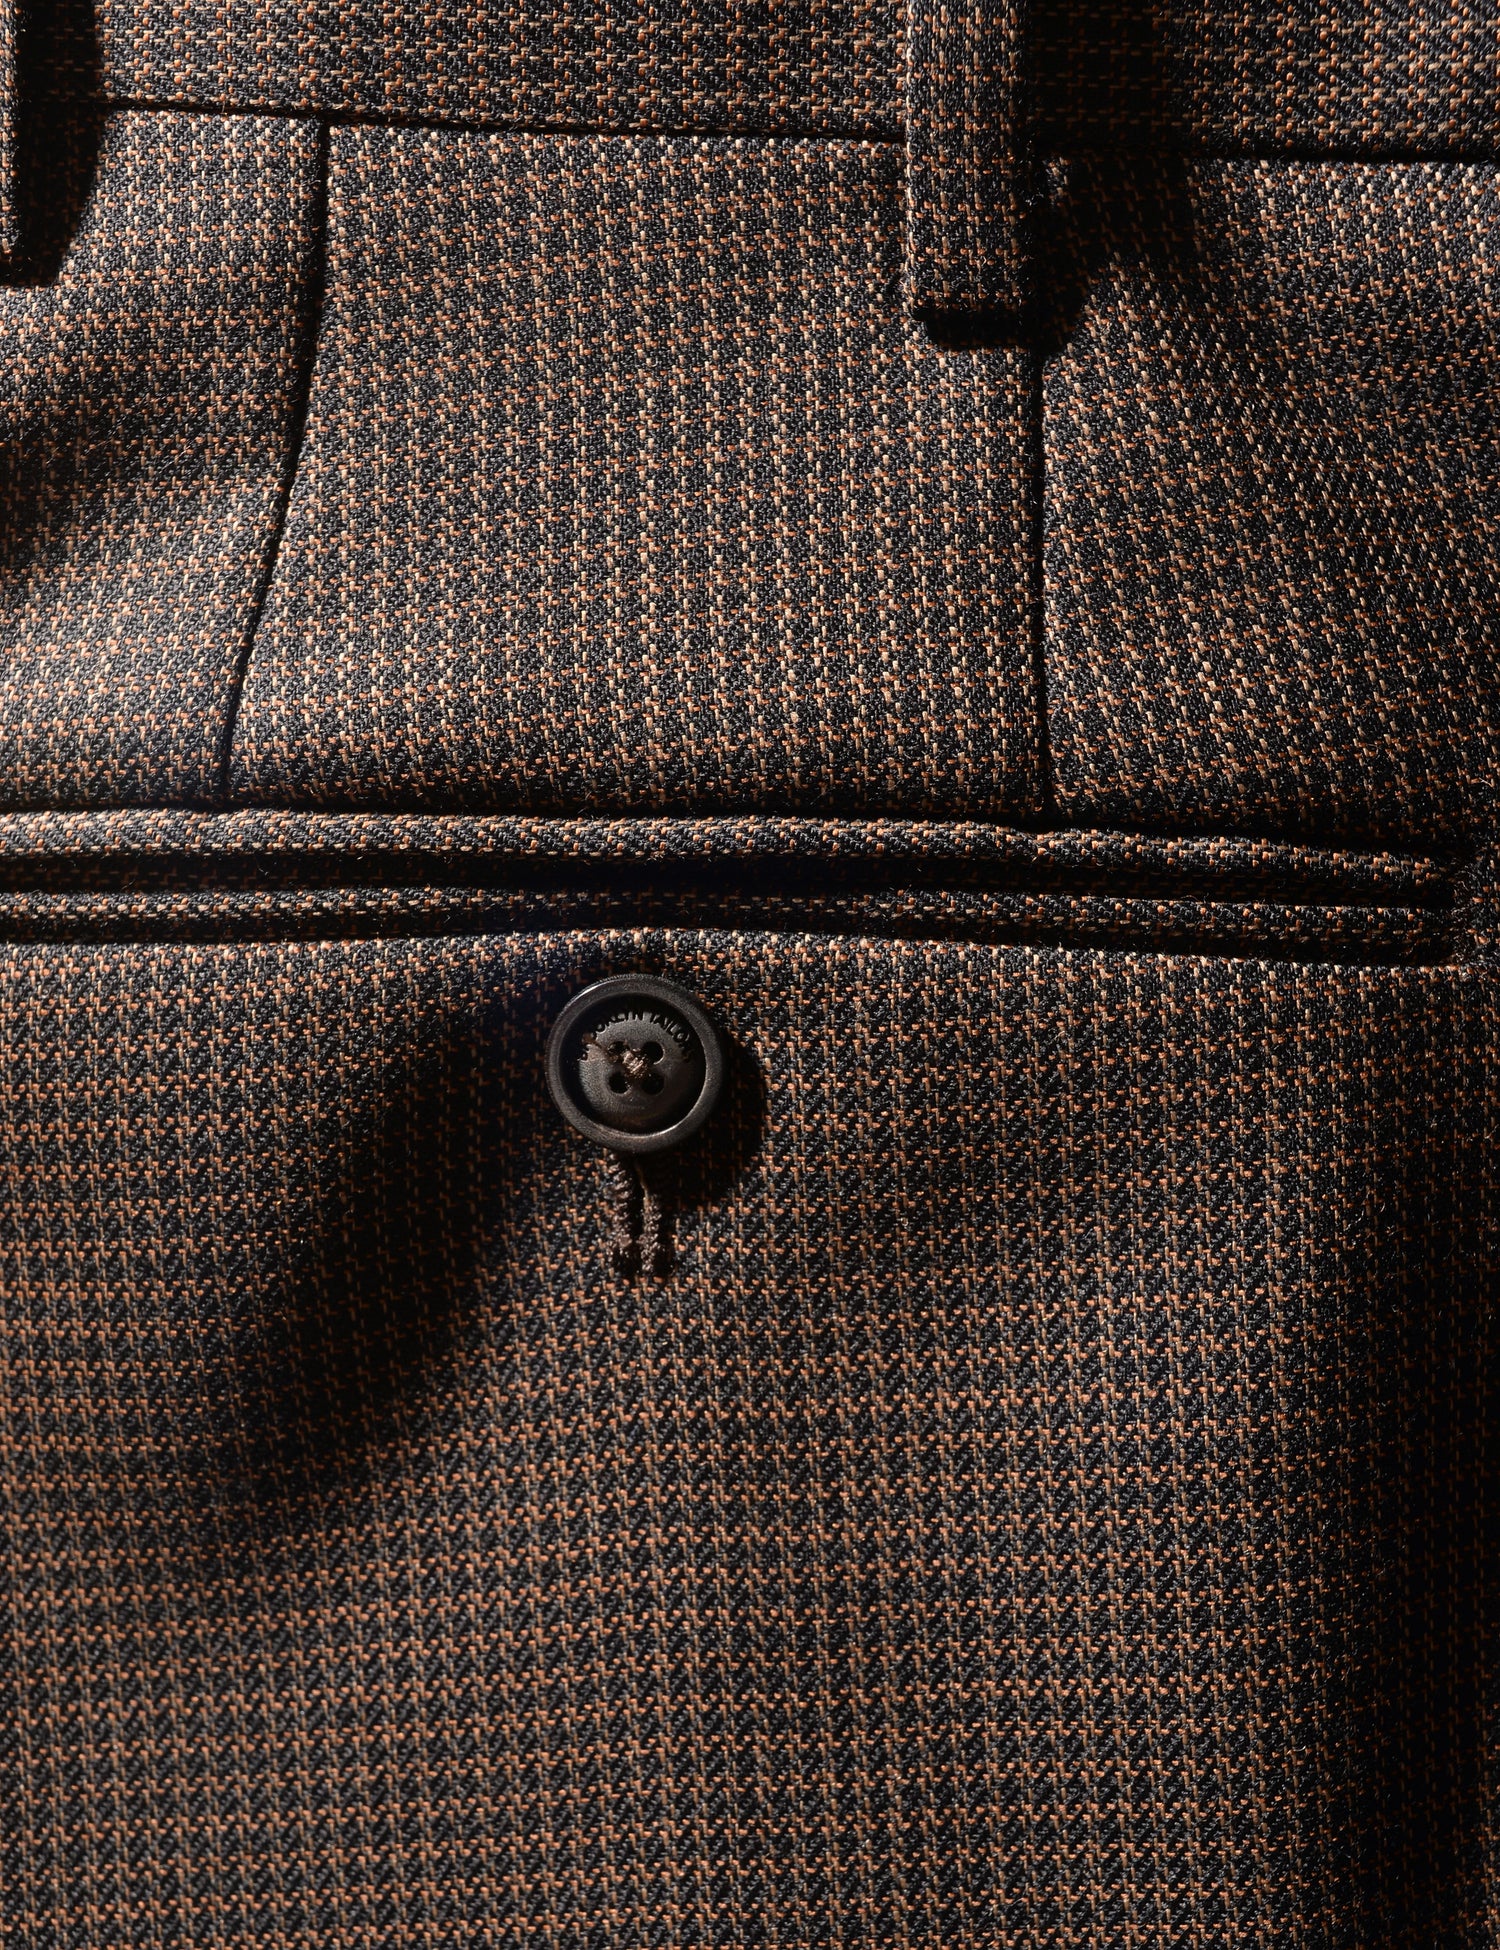 Back pocket detail shot of Brooklyn Tailors BKT36 Straight Leg Trouser in Wool Grid Weave - Blackened Earth showing back pocket, waistband, and fabric pattern